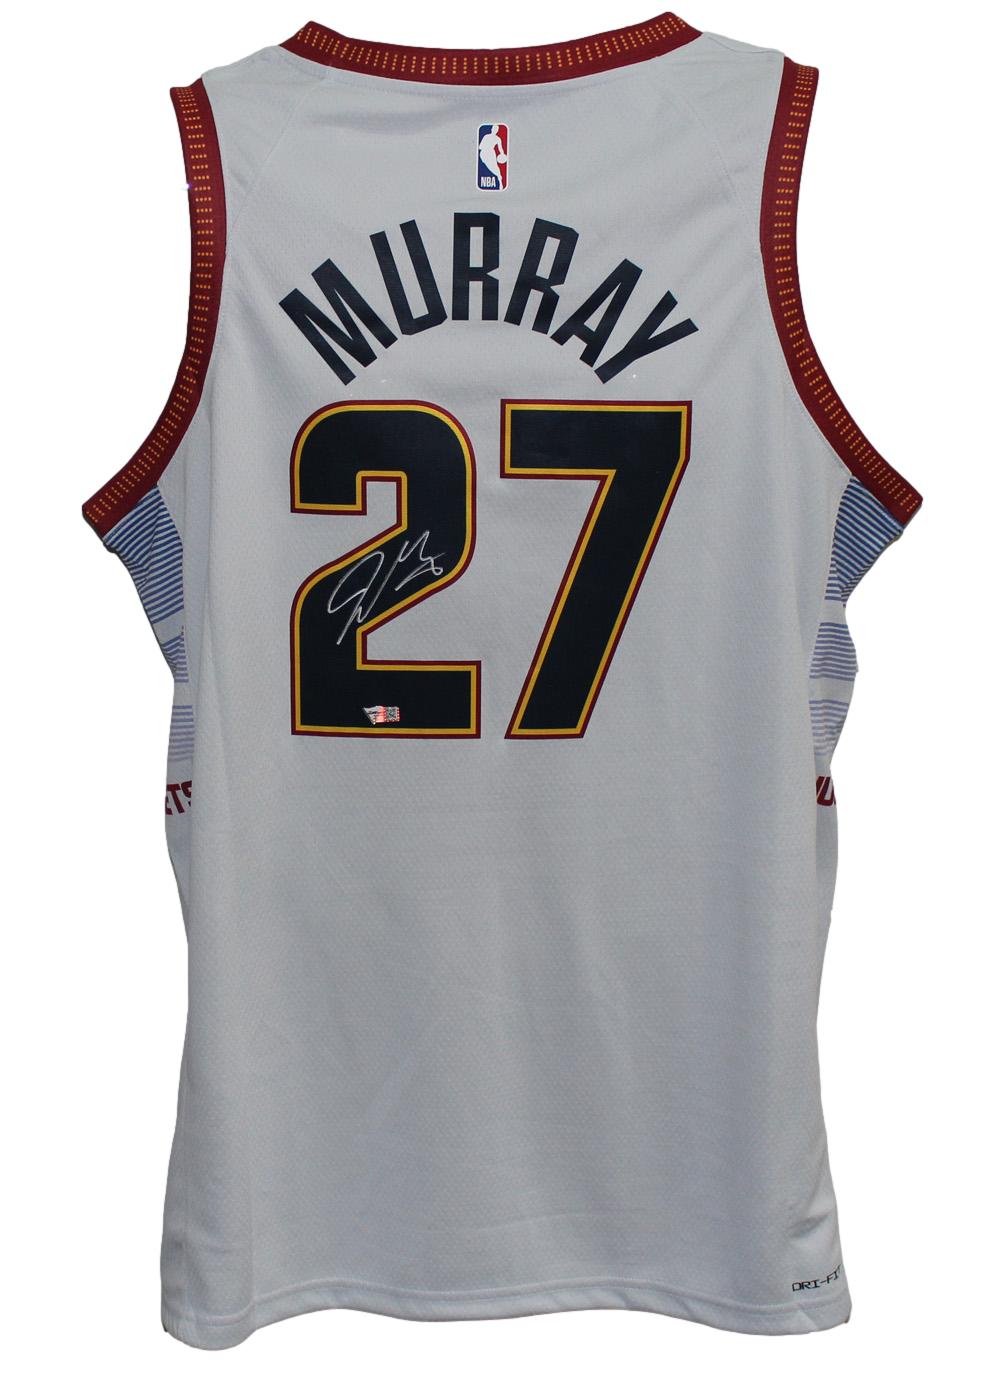 murray jersey nuggets